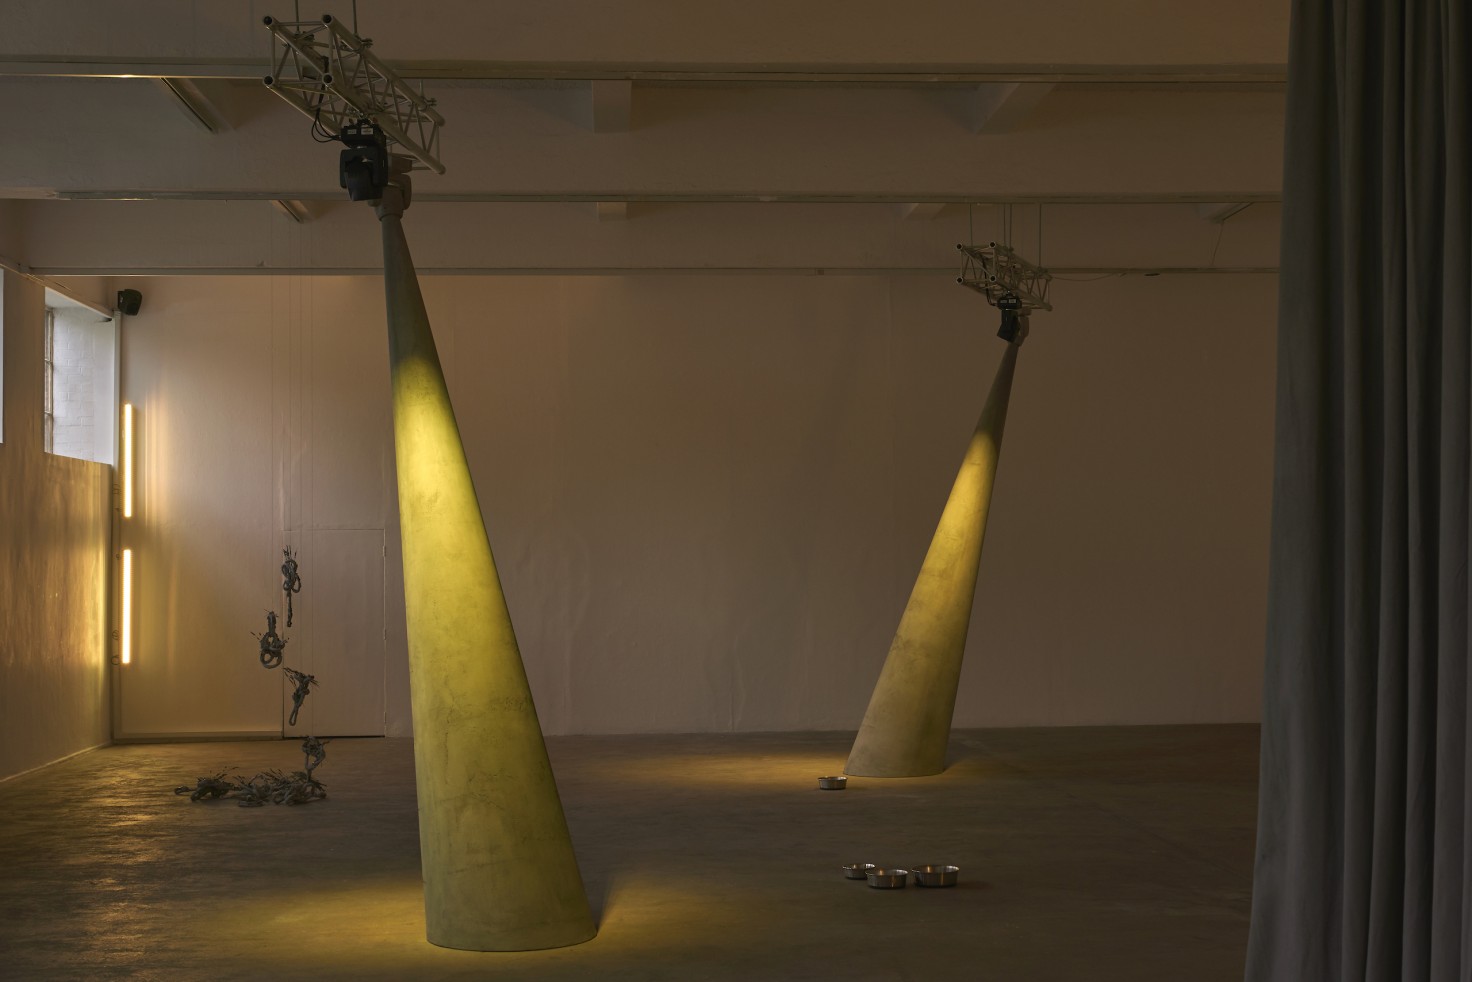 wo concrete columns lit by a warm yellow hue stand in the center of a mostly empty room. On the right hand side a thick curtain occupies around 10% of the frame. On the ceiling, small bits of scaffolding seem to hold up the columns and the two lights that shine down on them. Various aluminum pans lay on the floor and another object hangs in the background on the left hand side.